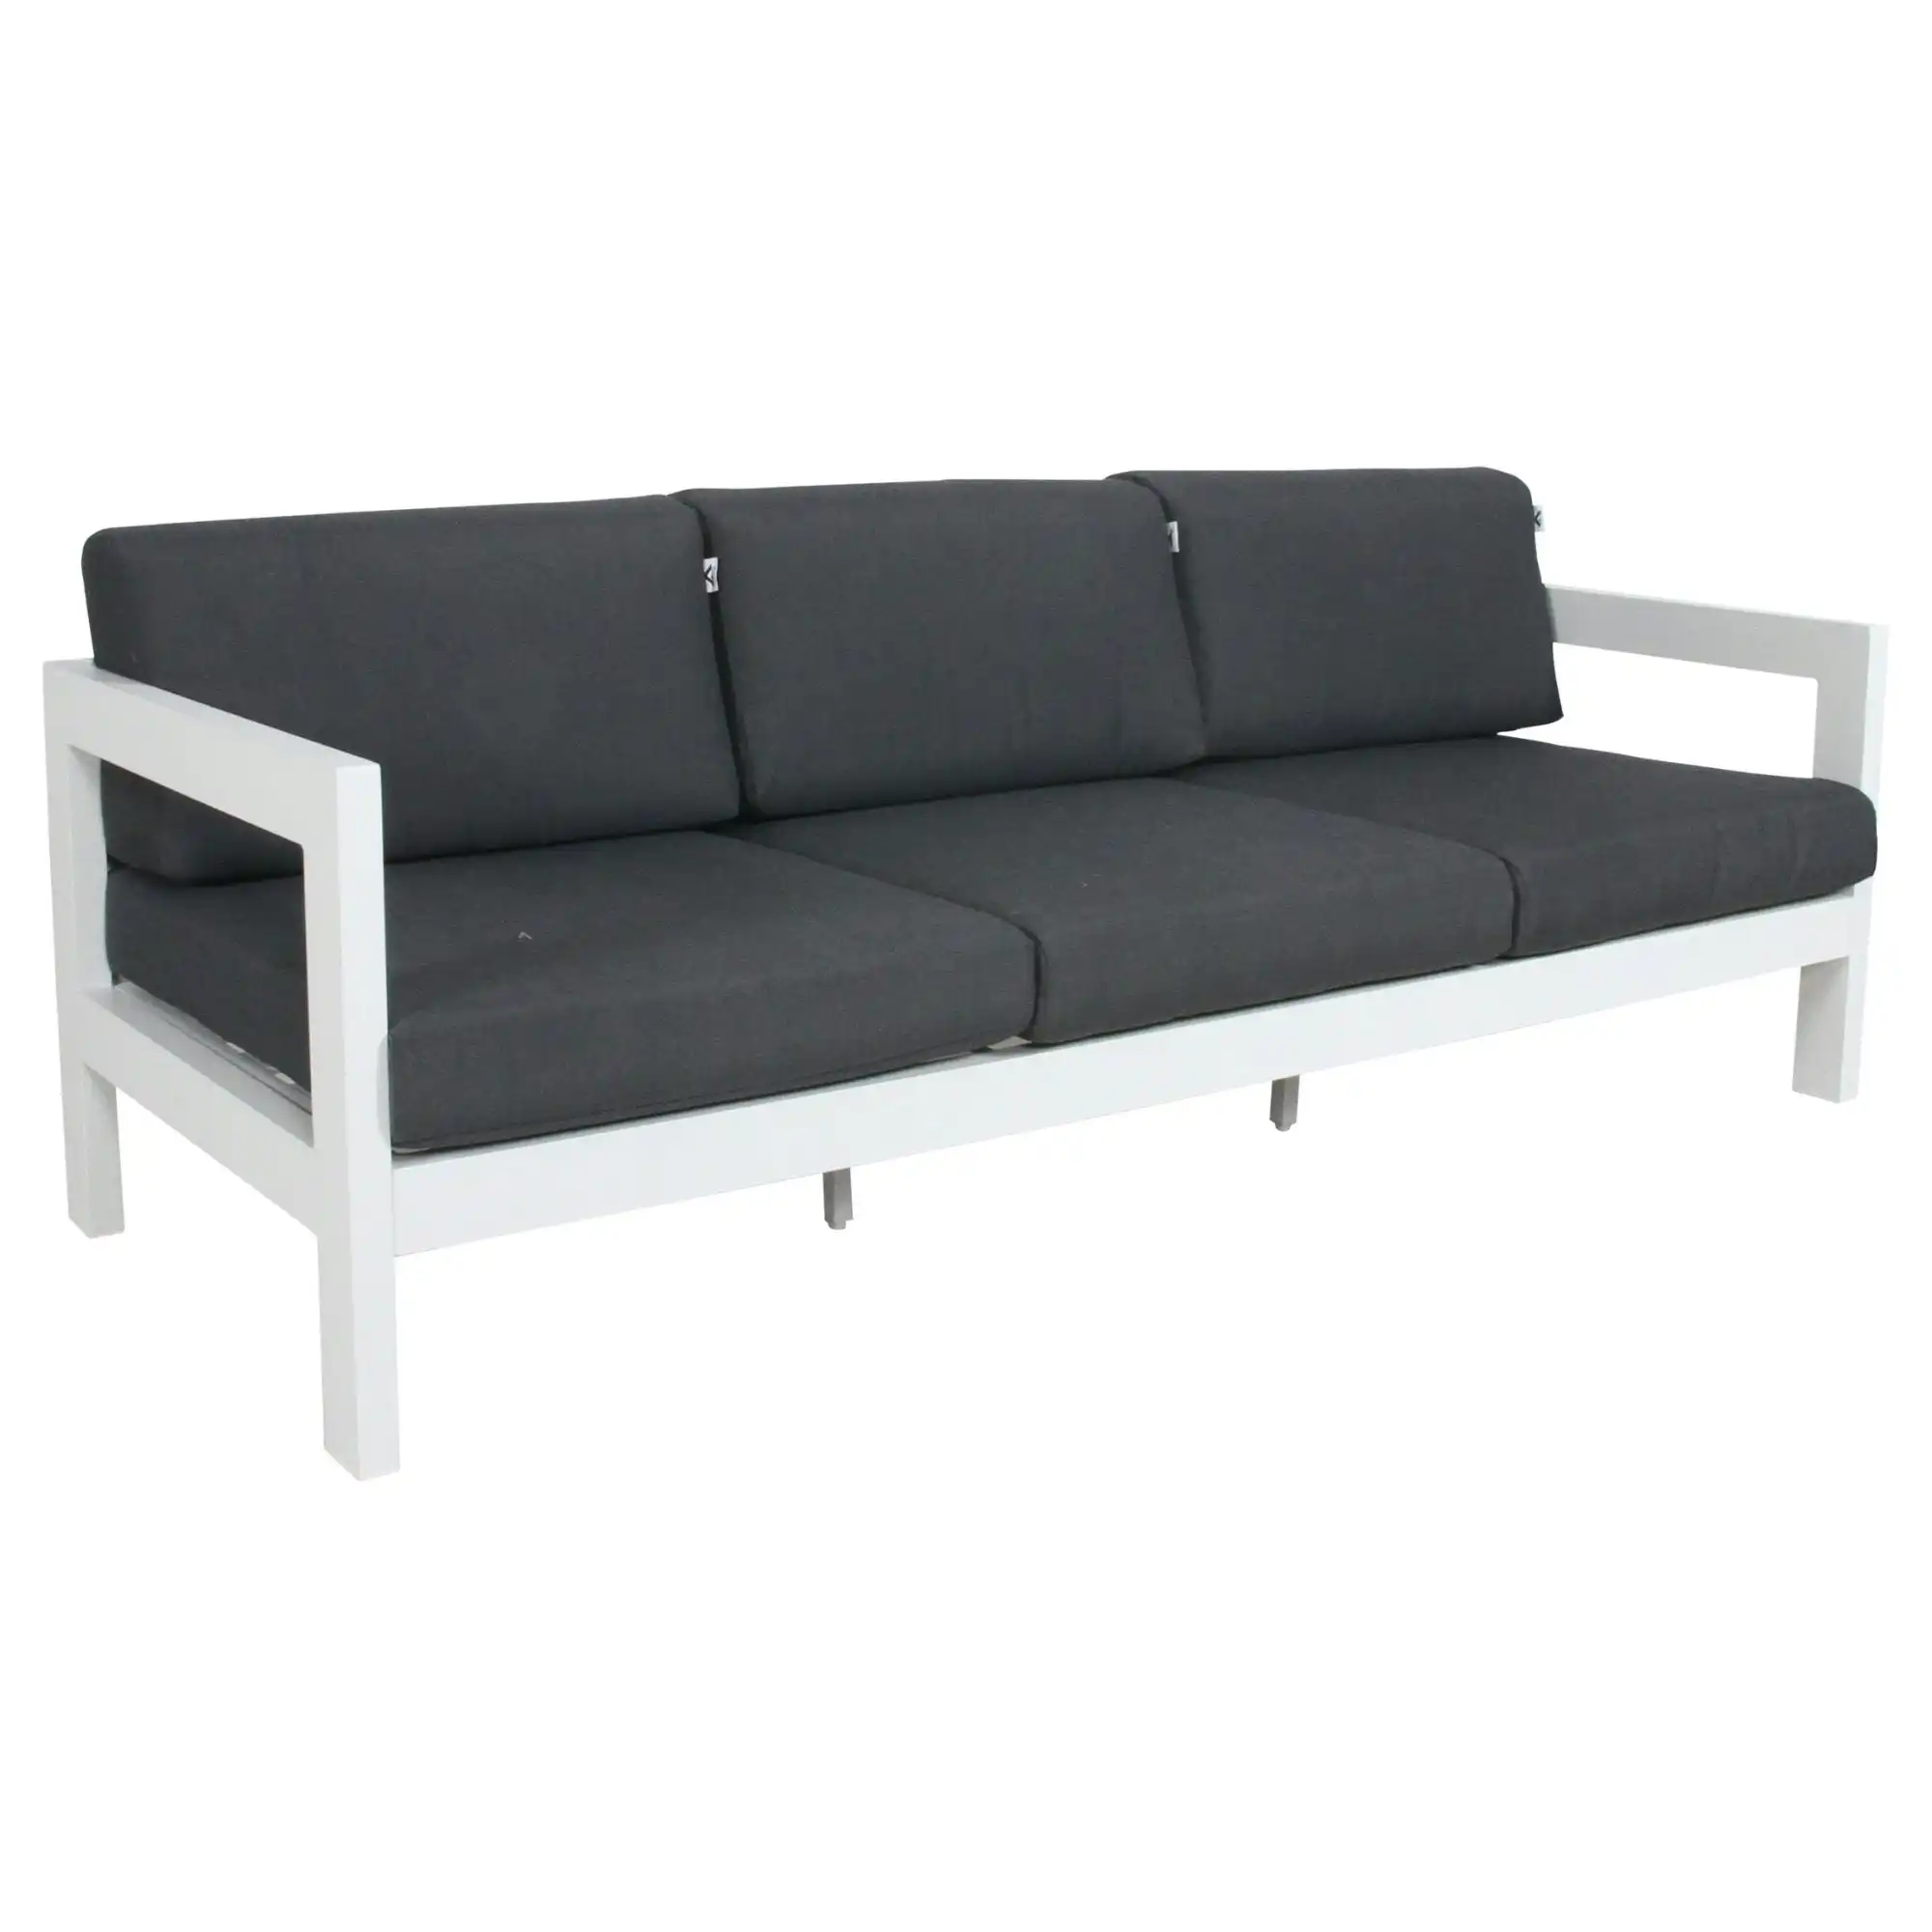 Outie 3 Seater Outdoor Sofa Lounge